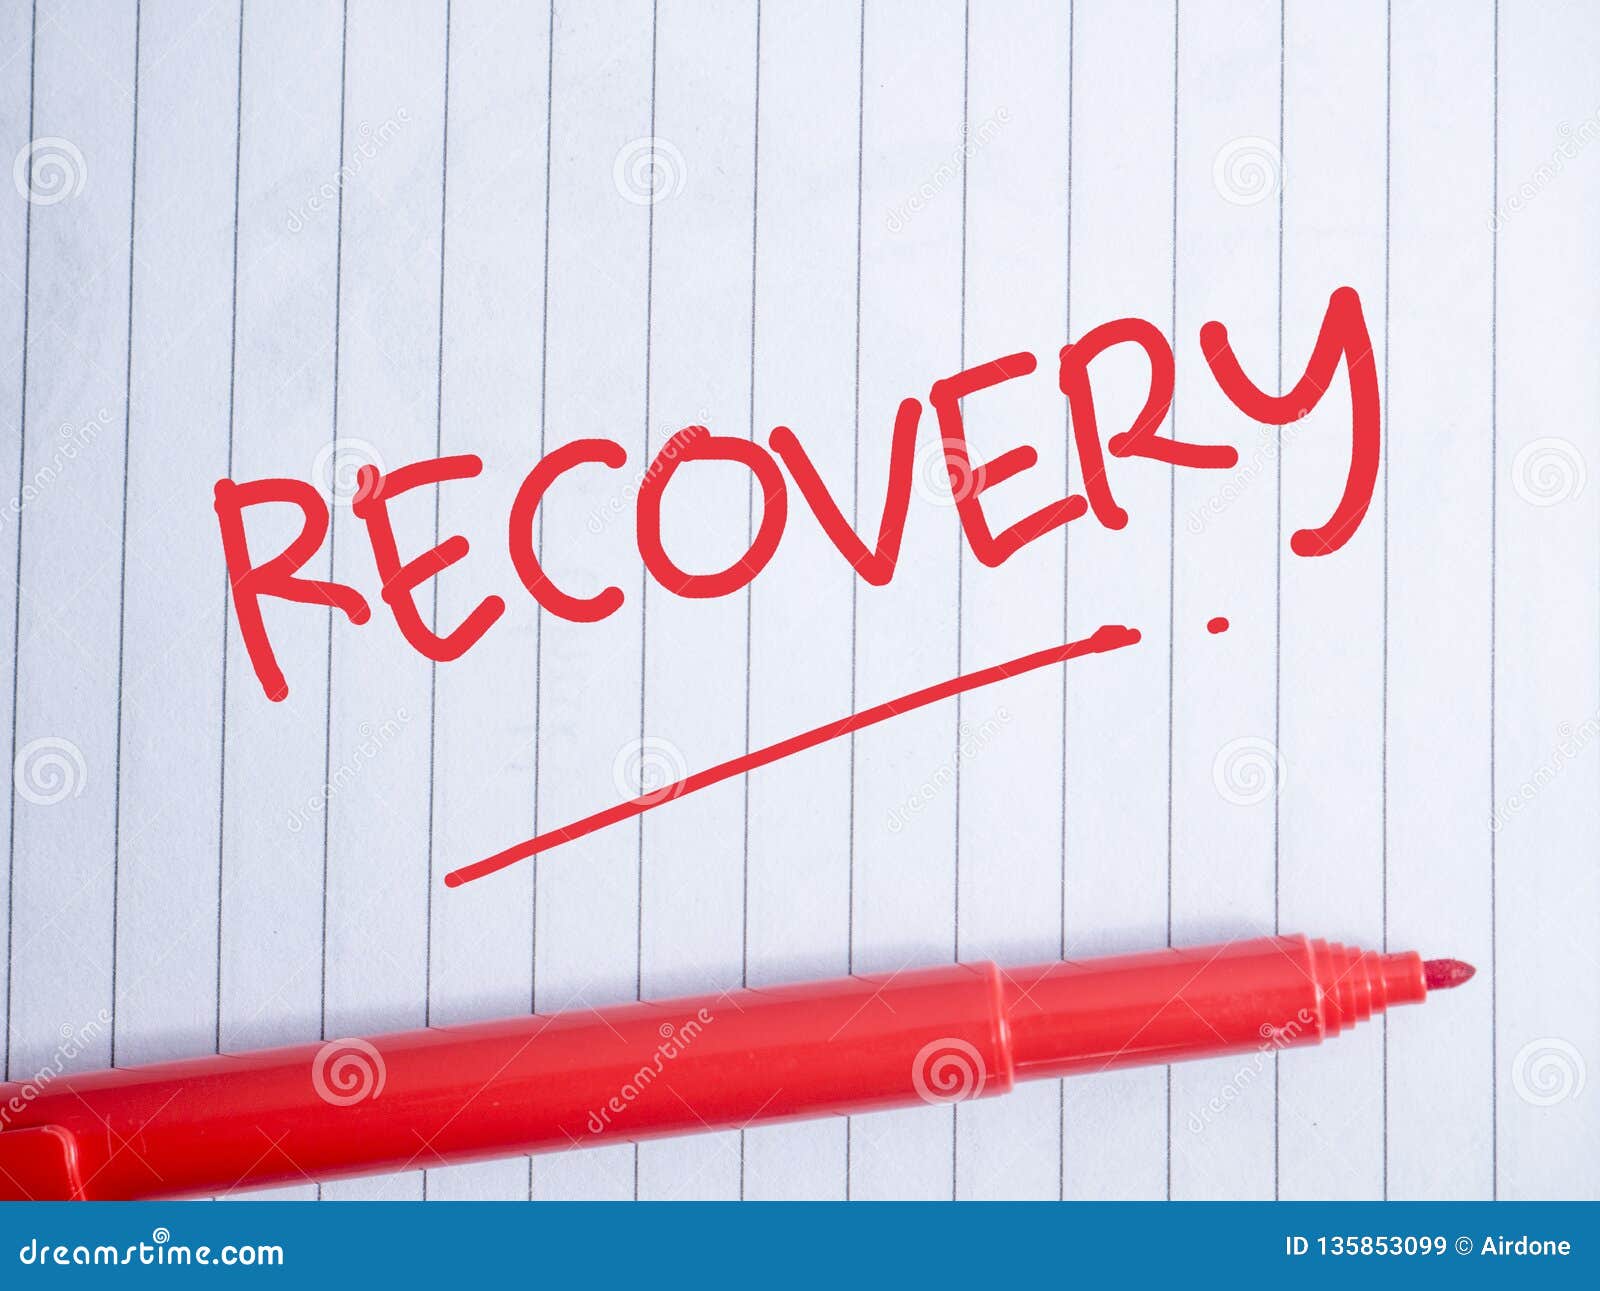 recovery, motivational words quotes concept